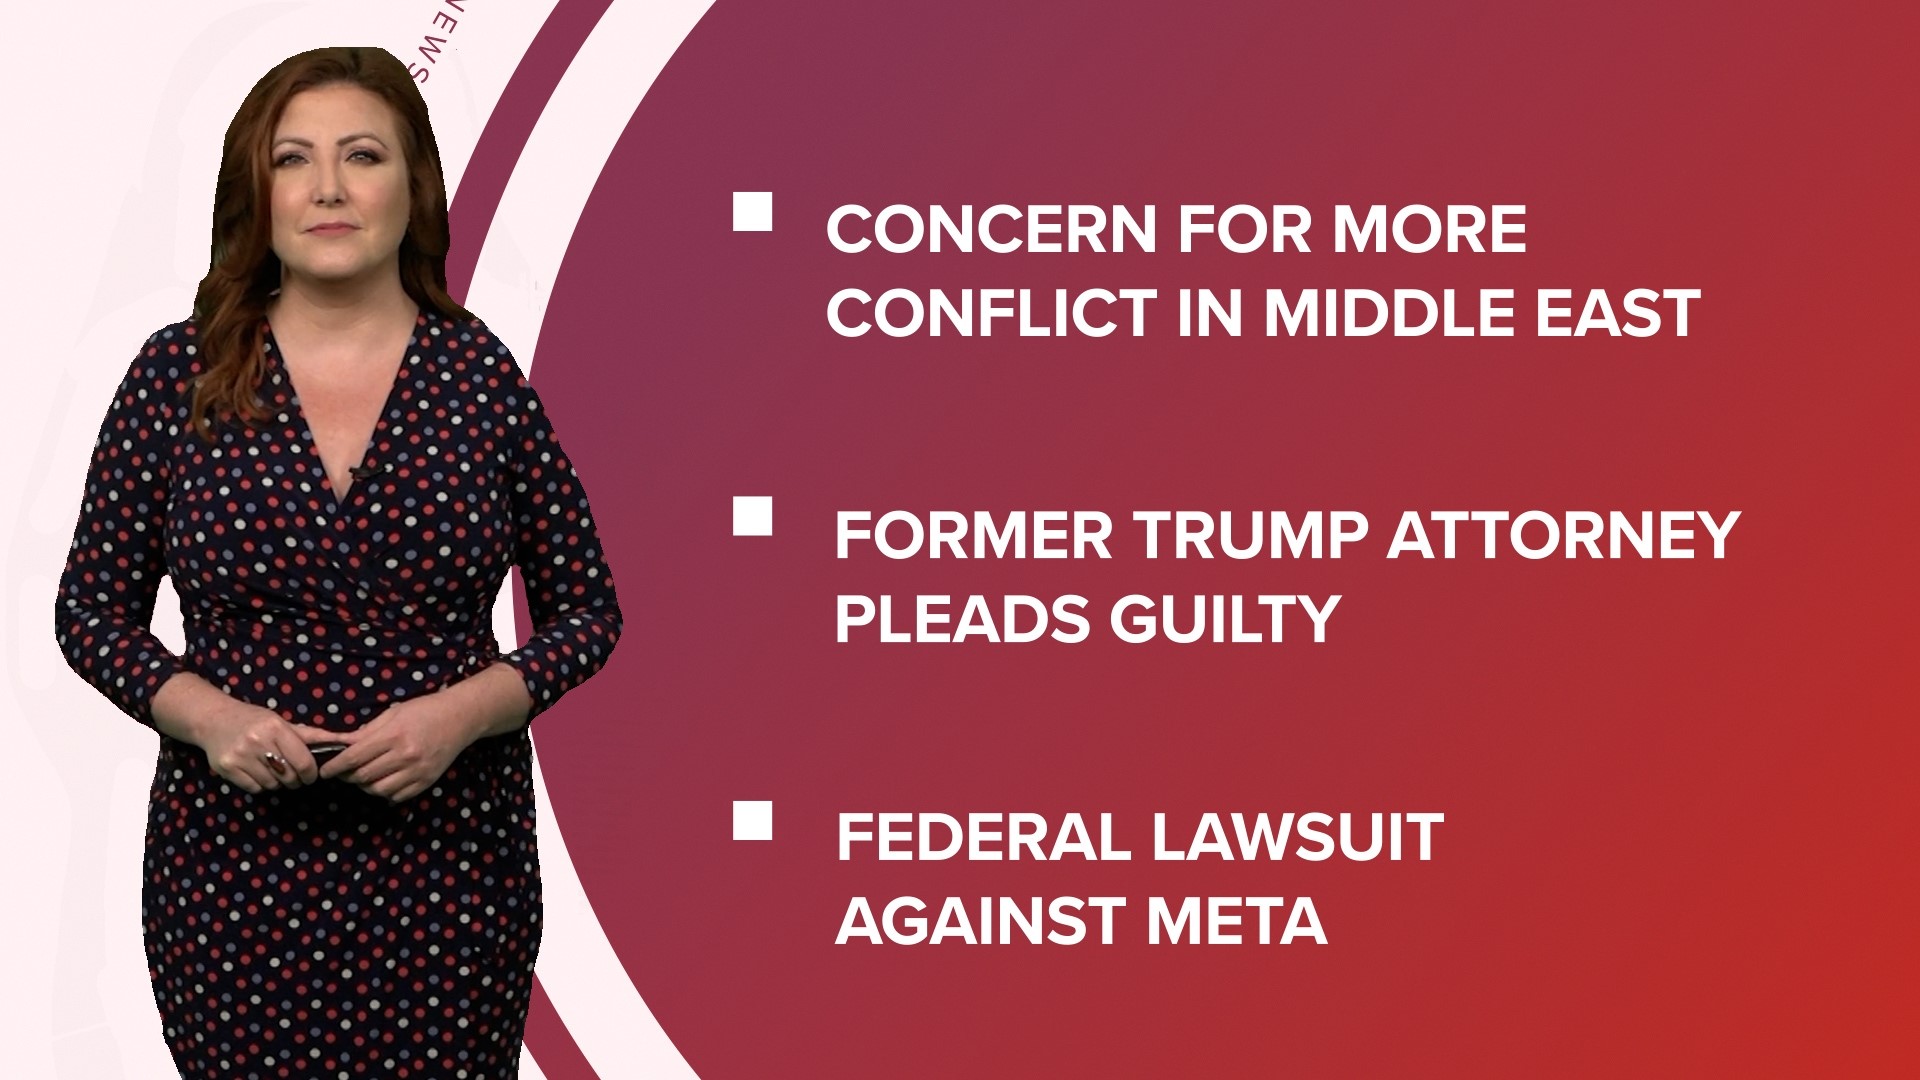 A look at what is happening in the news from concerns for a broader conflict in the Middle East to 41 states and D.C. sue Meta and Starbucks unveils holiday cups.